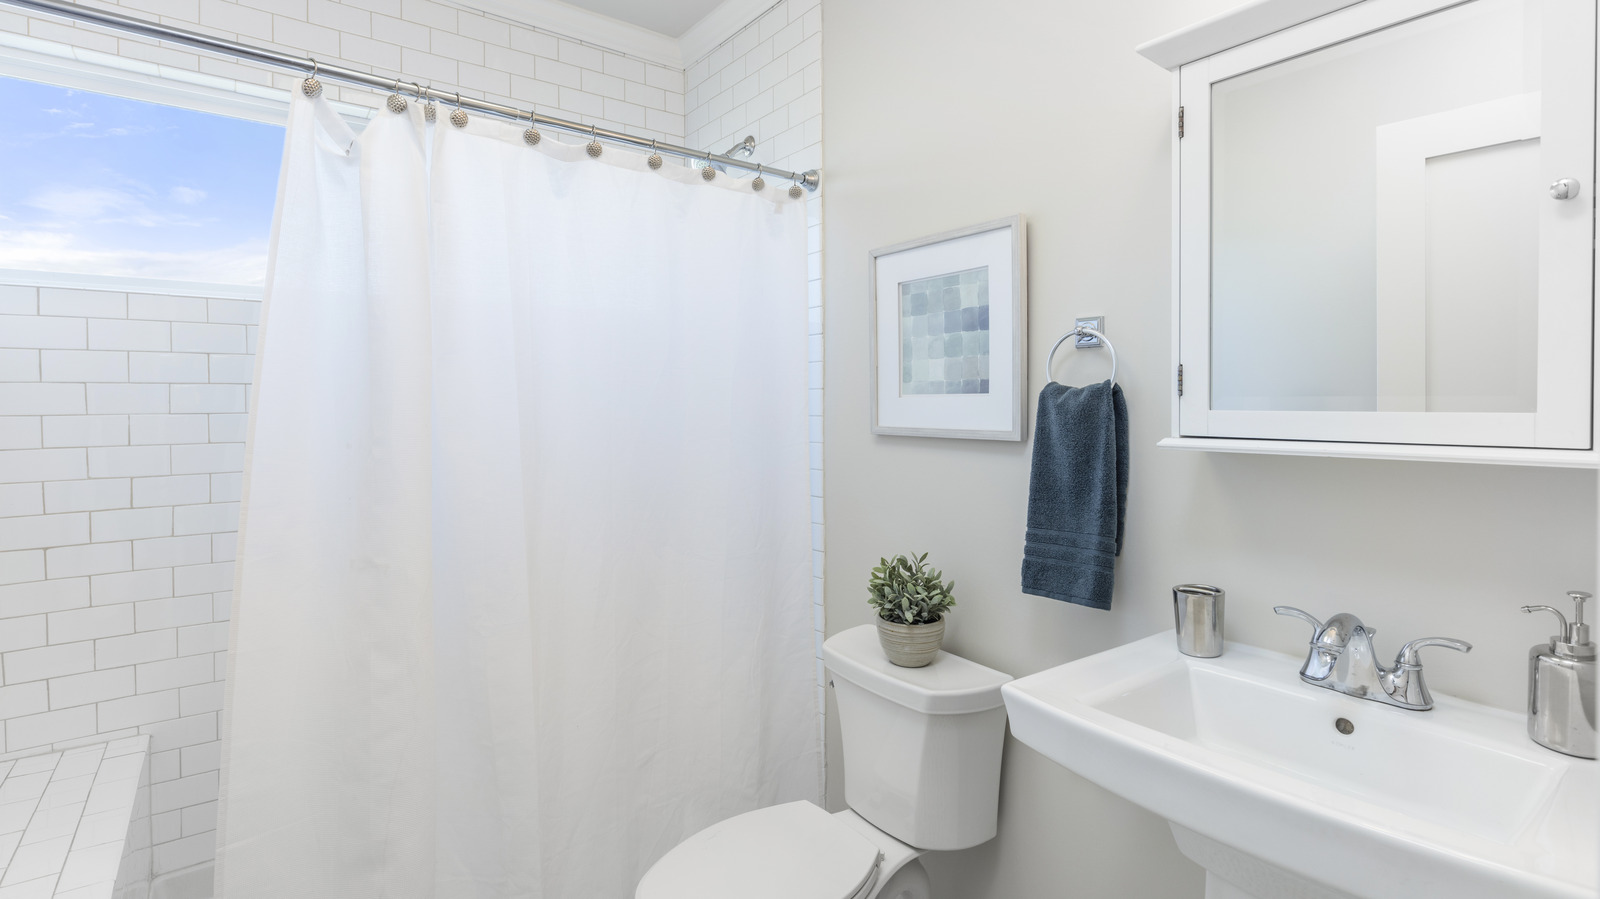 How To Keep A Shower Curtain Rod From Falling